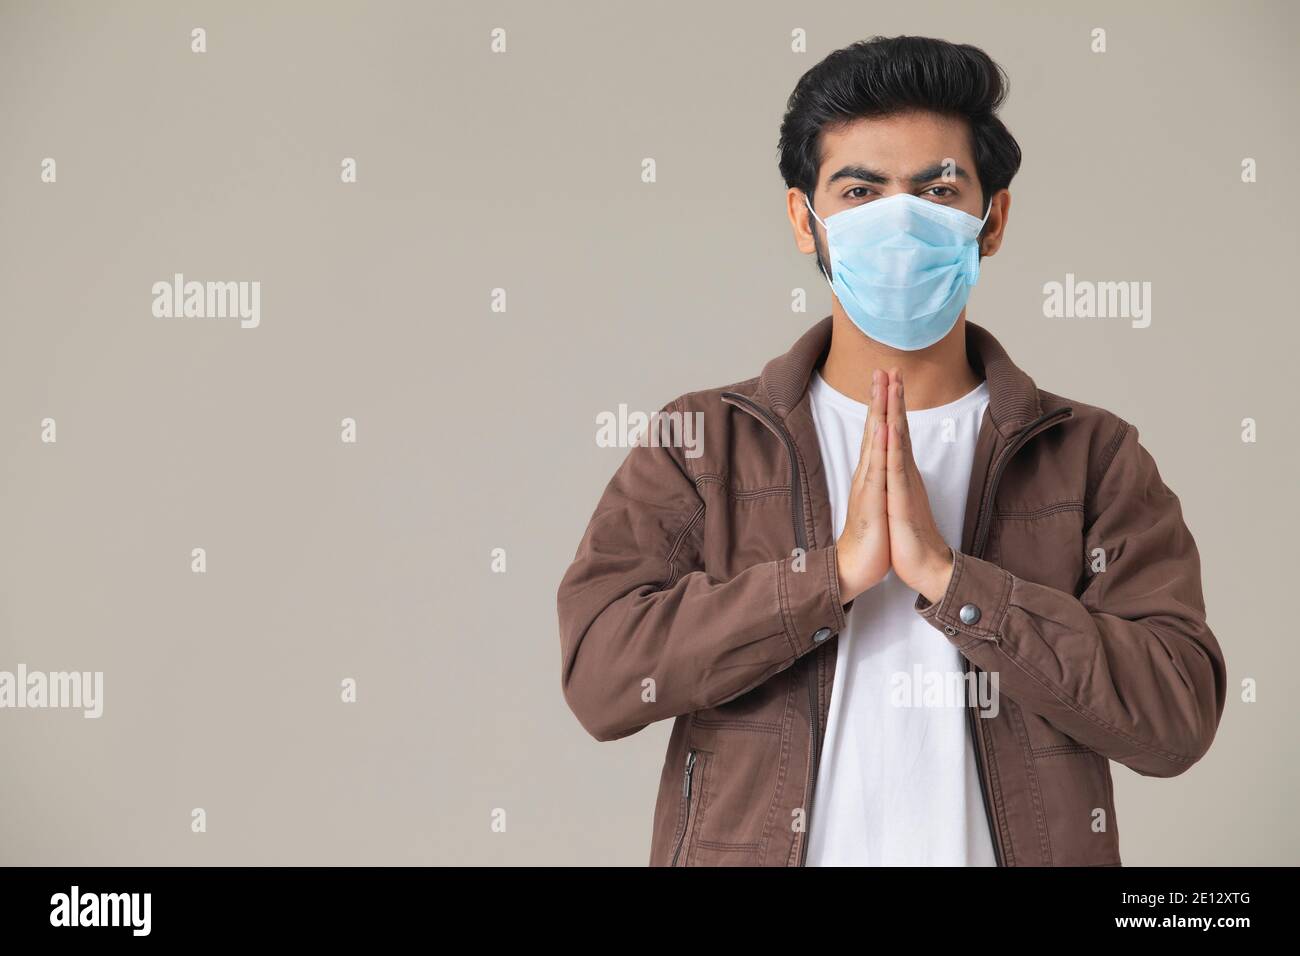 A YOUNG MAN WEARING MASK GREETING WITH FOLDED HANDS Stock Photo